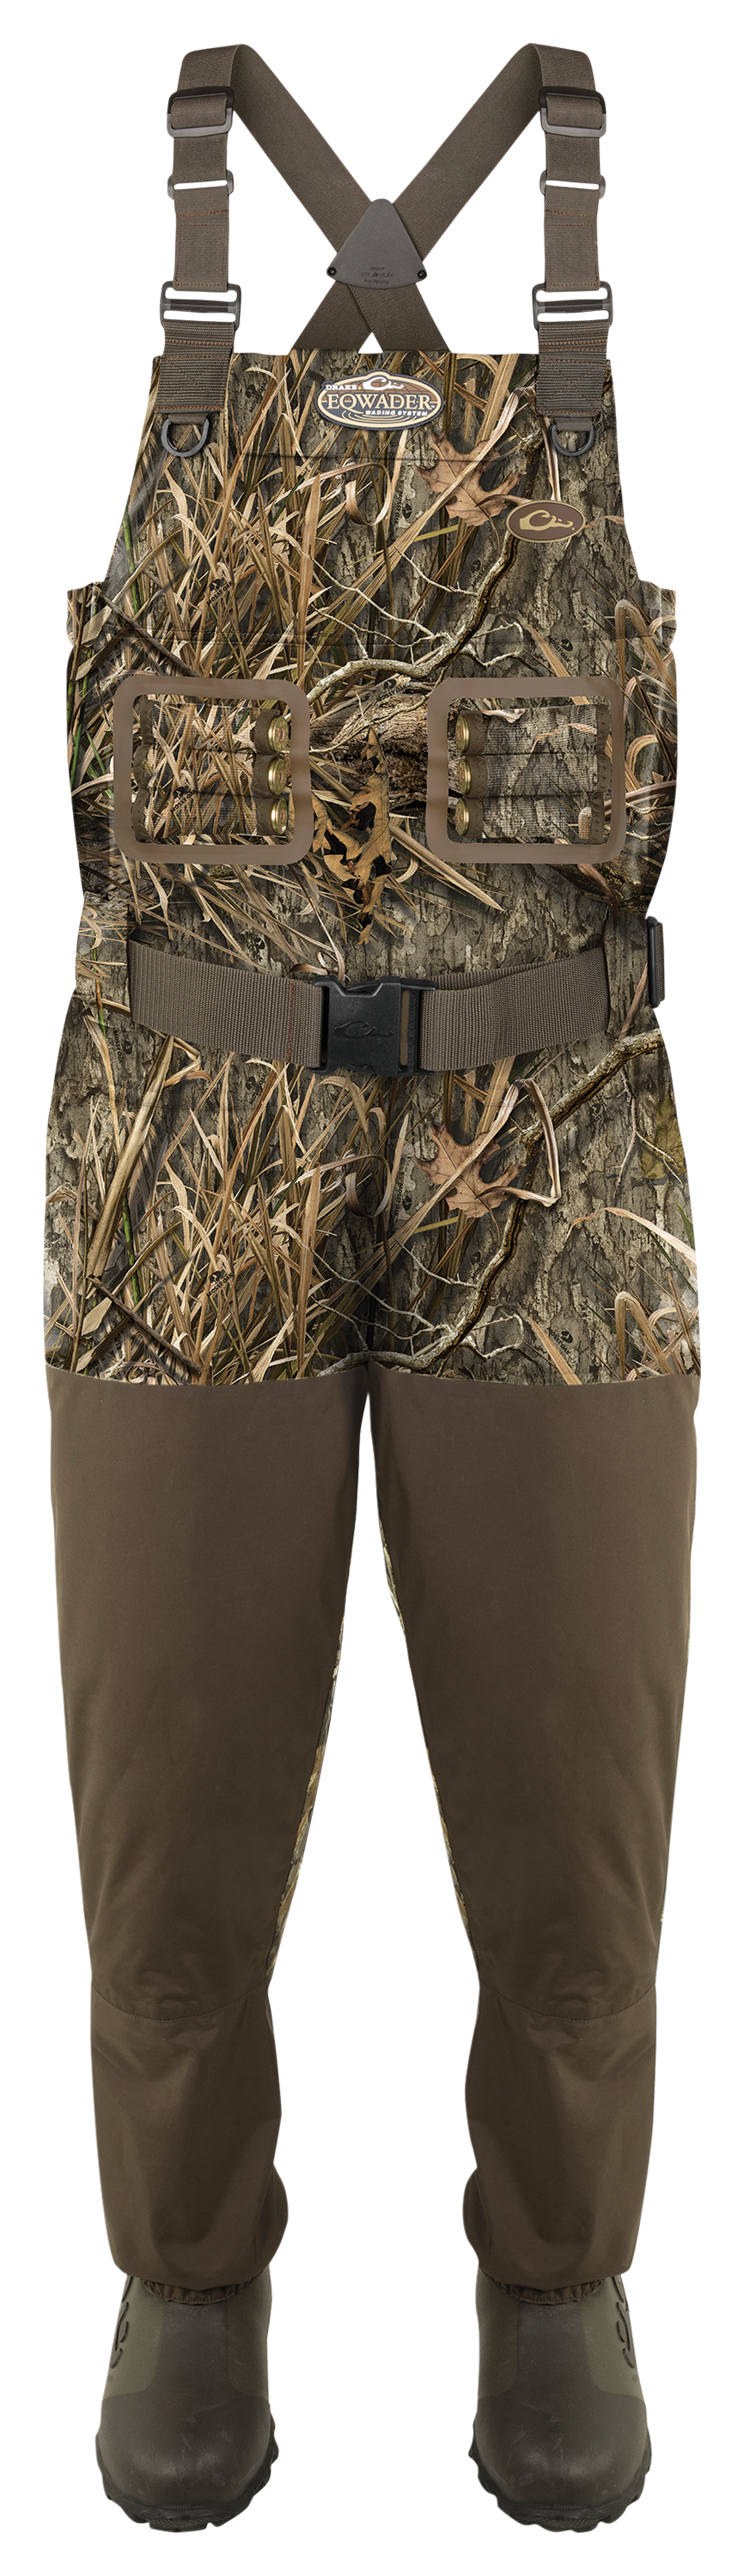 Drake Waterfowl Systems Eqwader 1600 Breathable Waders